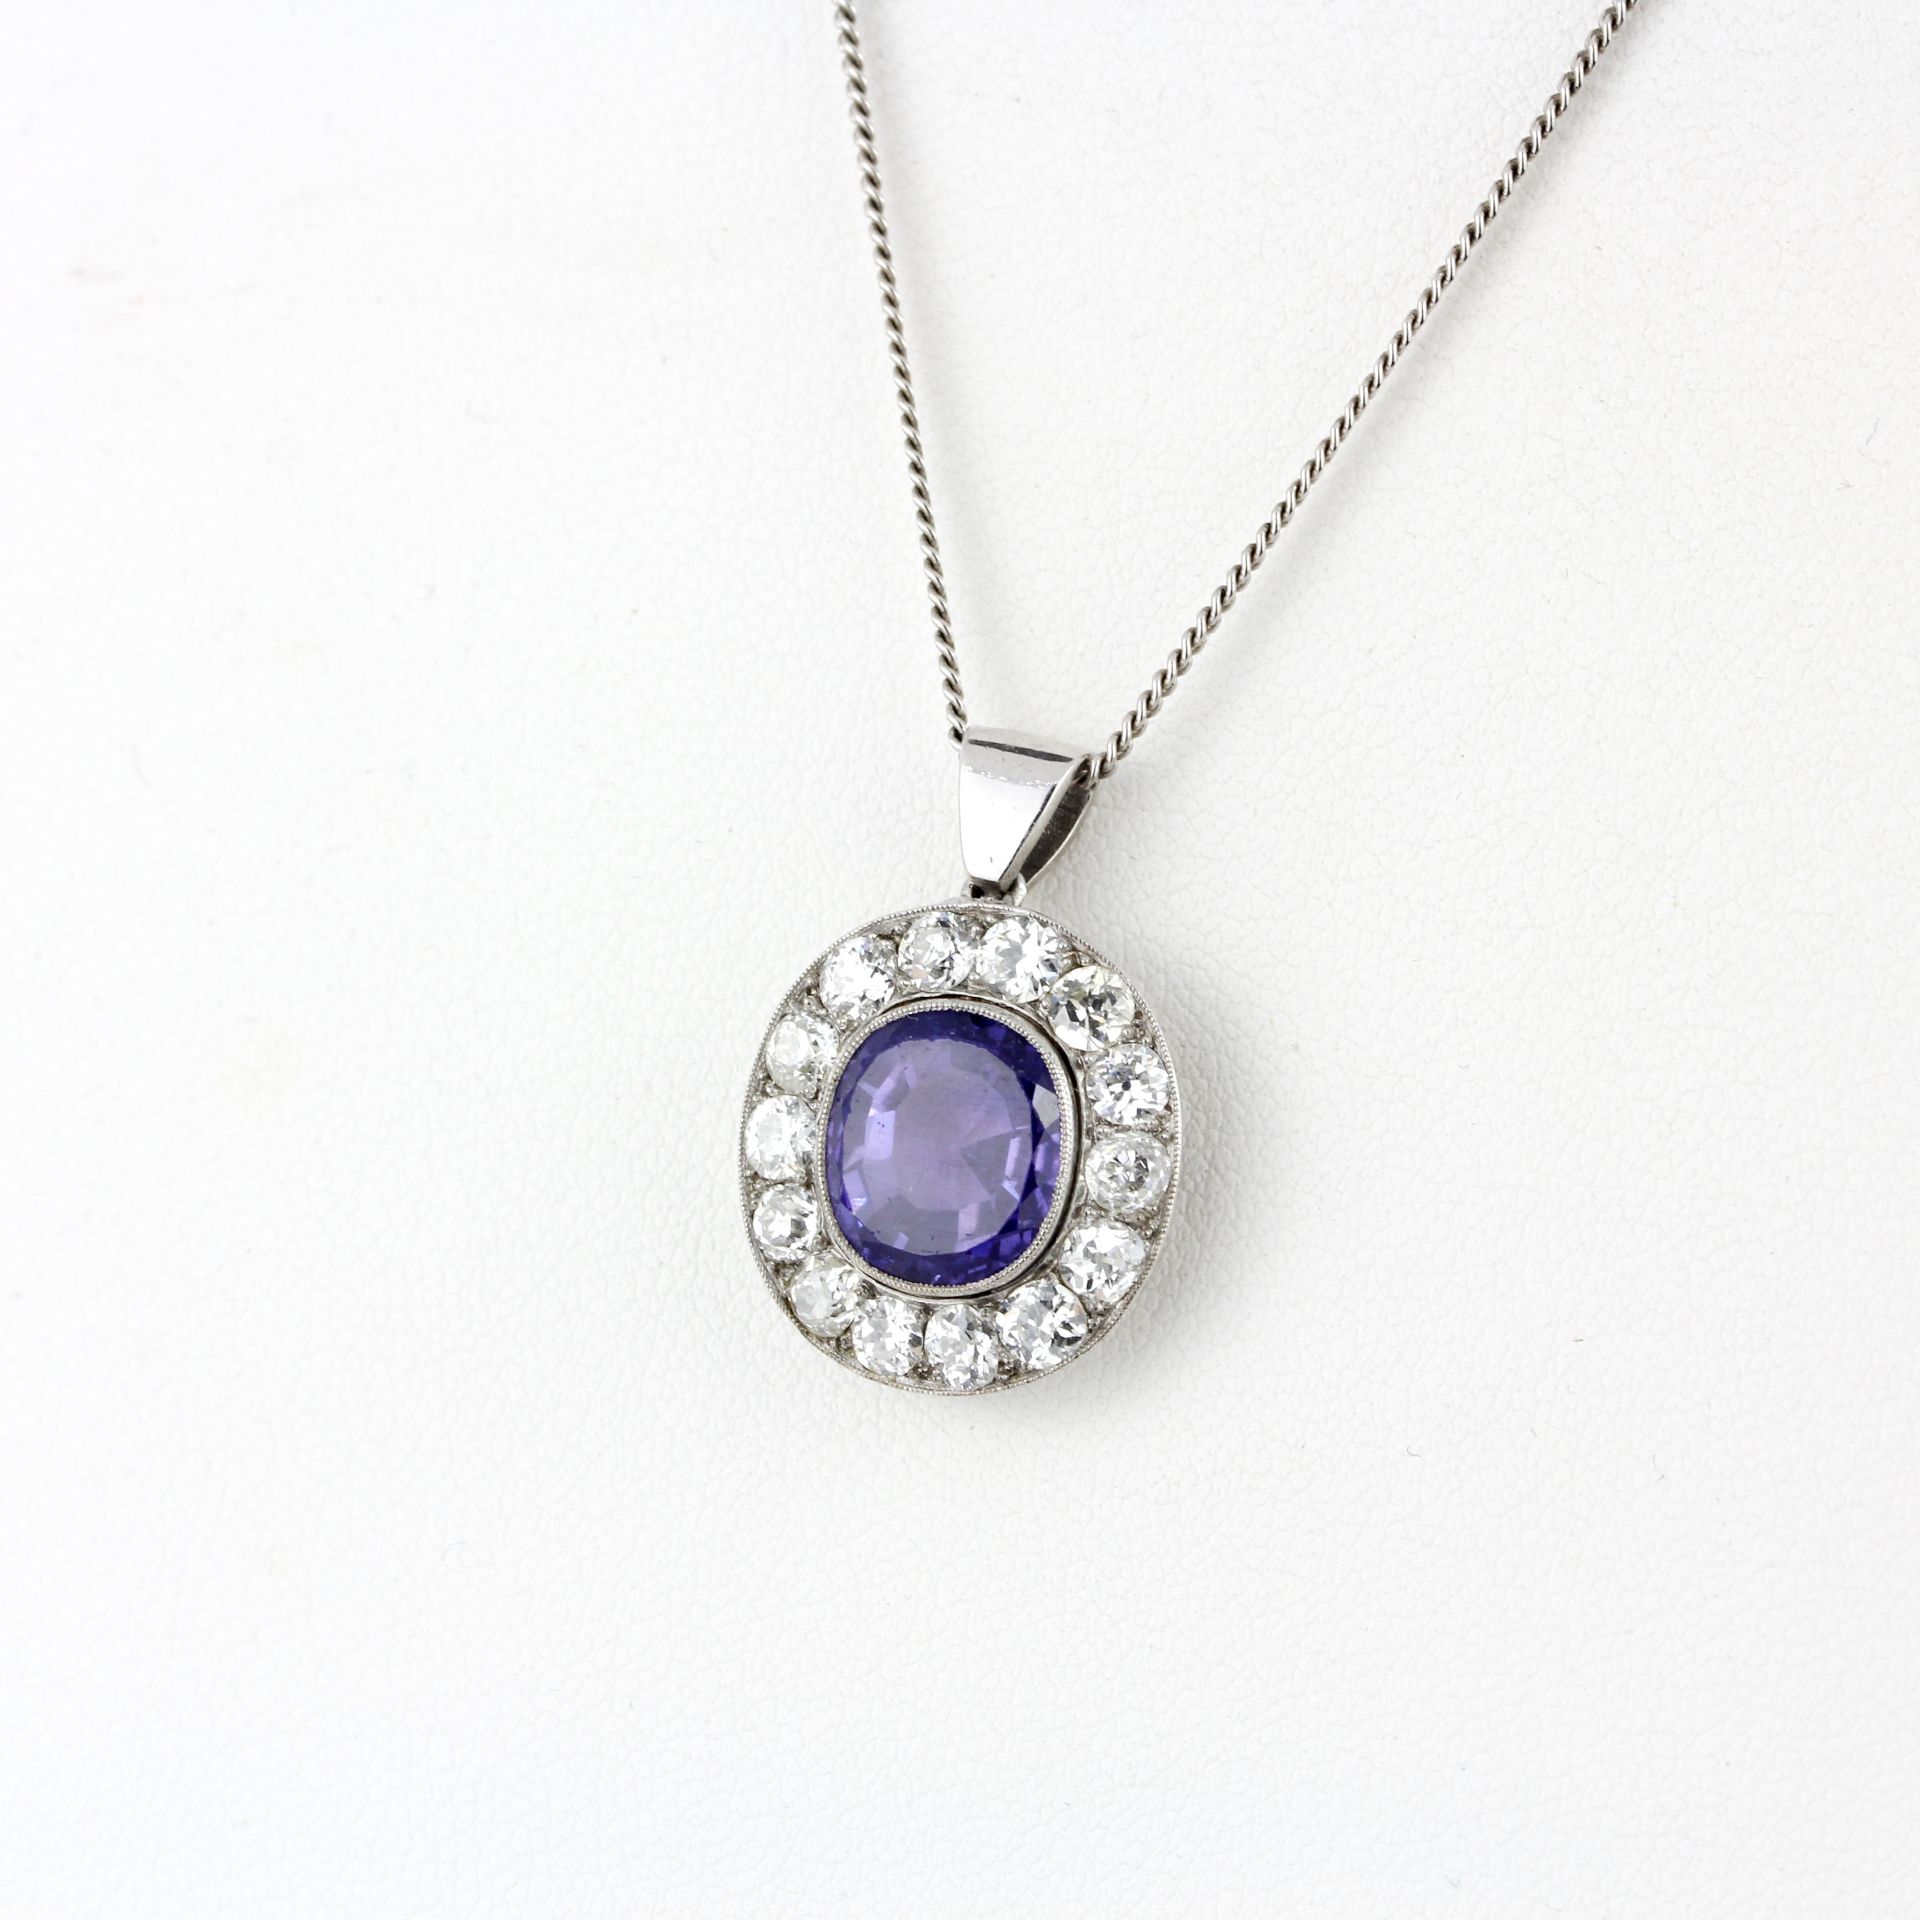 A white metal (tested minimum 9ct gold) pendant set with an oval cut purplish sapphire surrounded by - Image 2 of 4